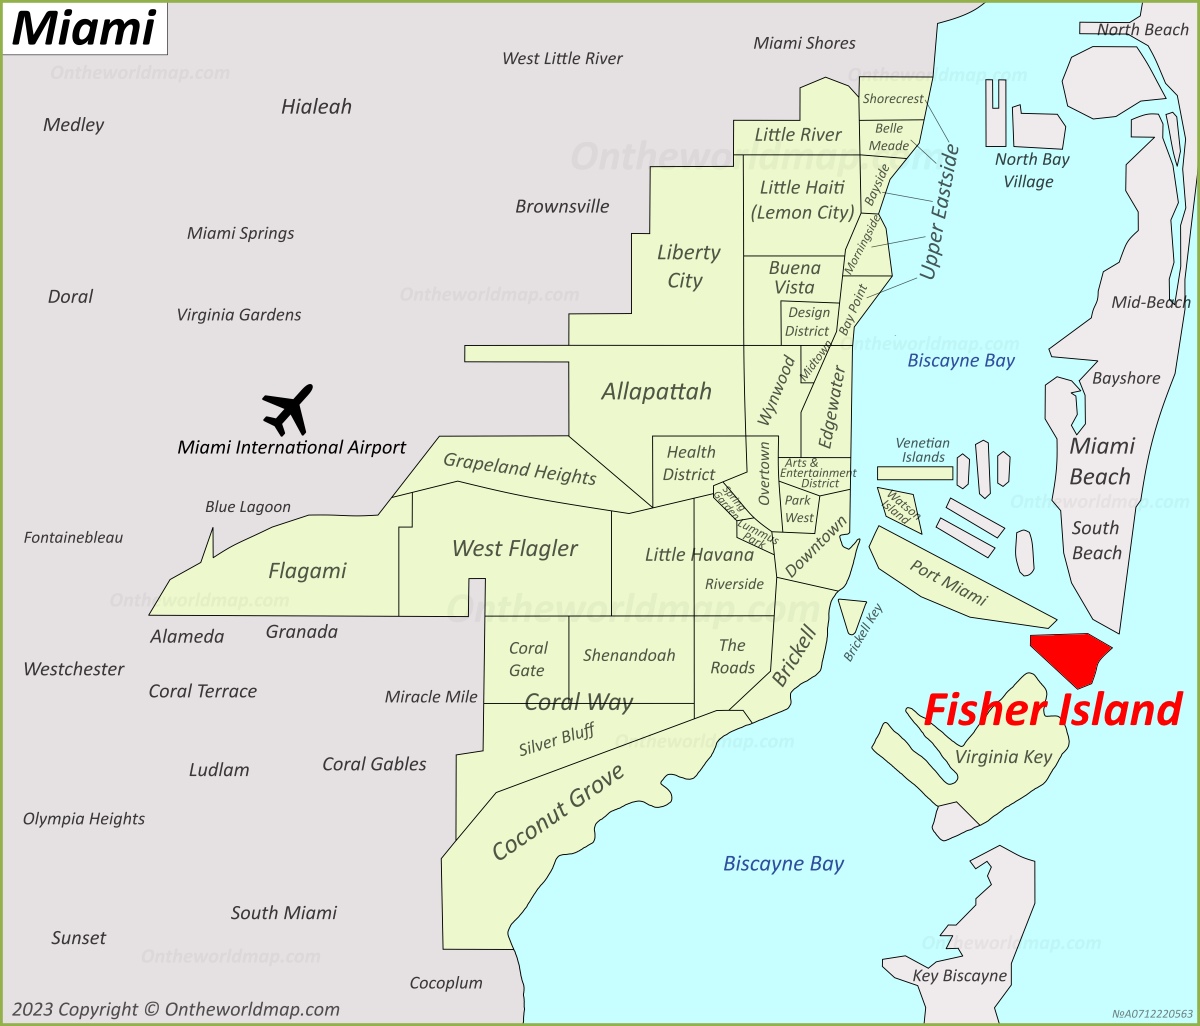 Fisher Island Location On The Miami Map